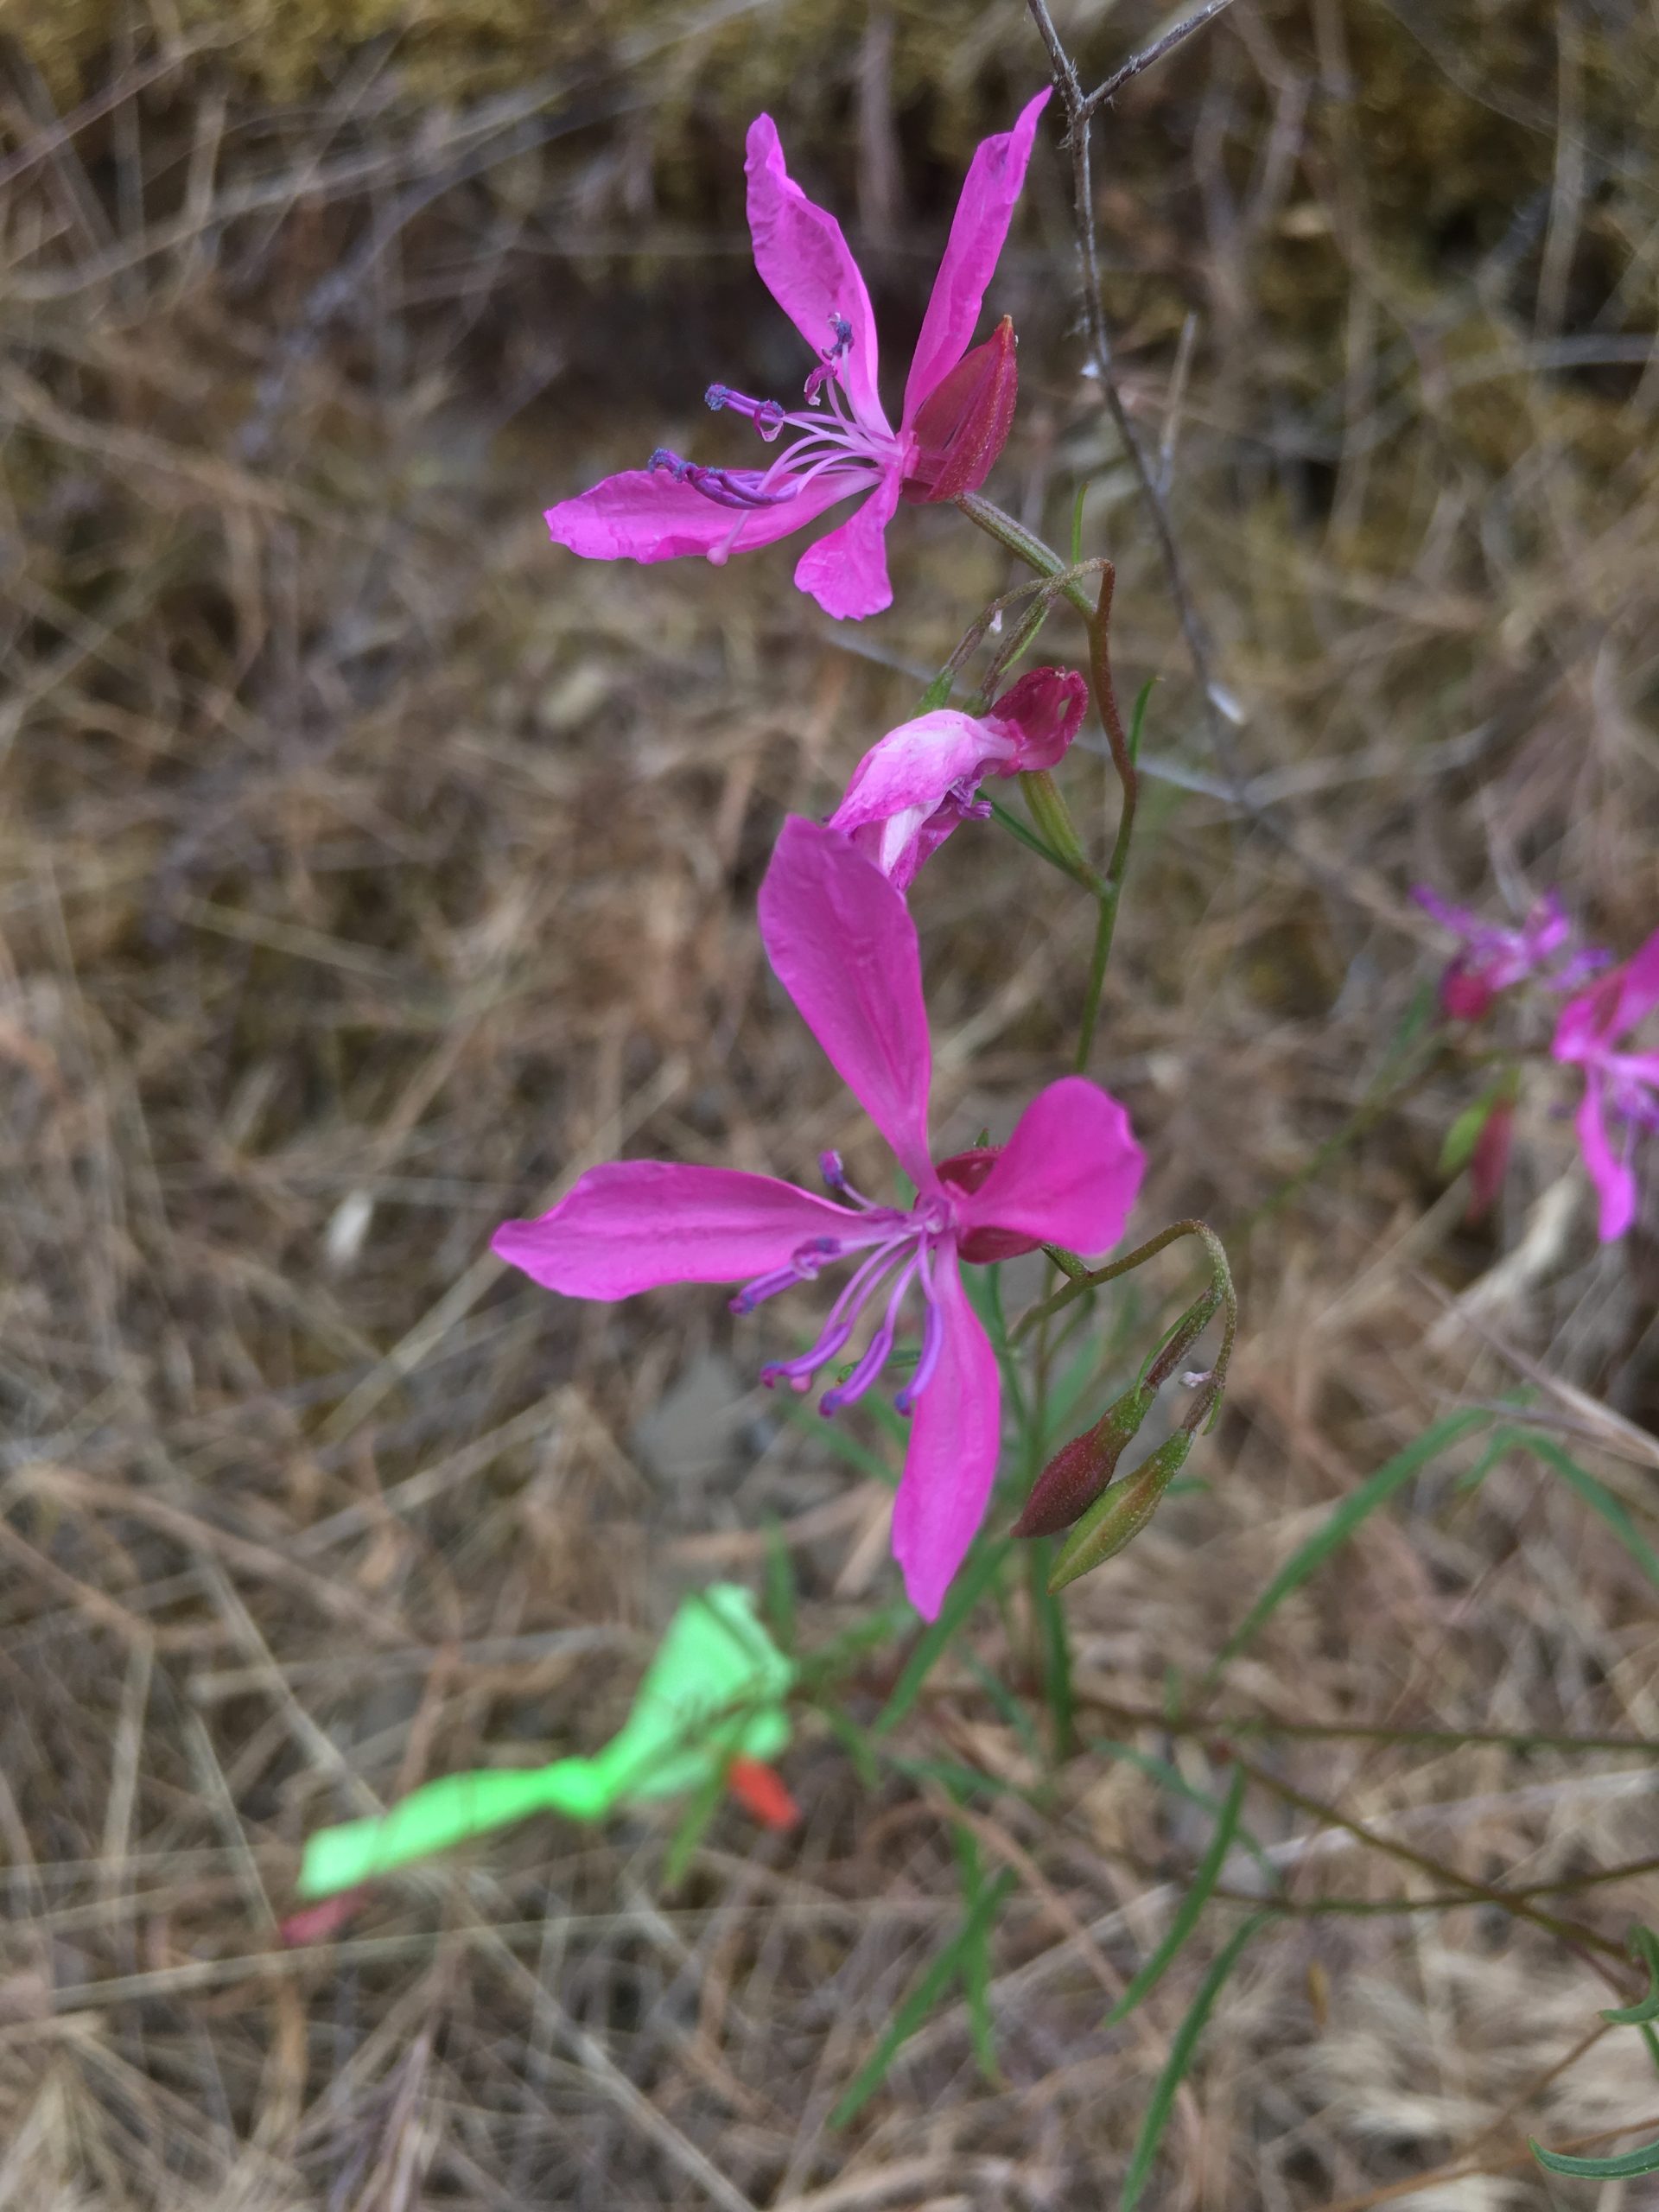 Merced clarkia’s were marked with green flagging to make them easily identifiable when time came to collect seed